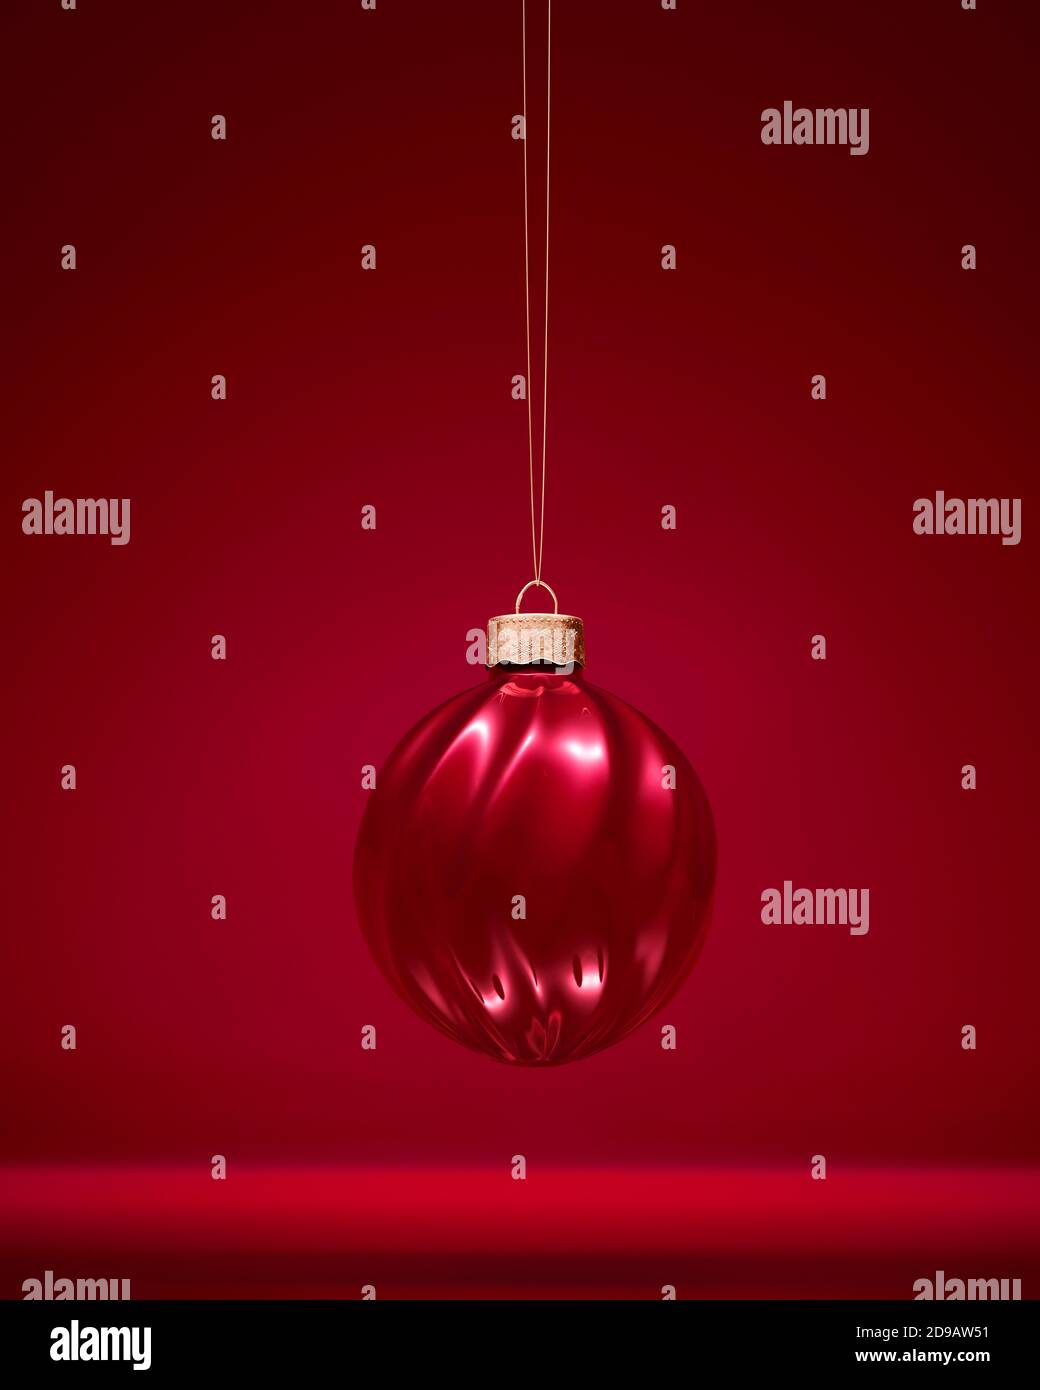 Burgundy red twisted ribbed Christmas ball. Glossy ornament. Red shaded background. Christmas decoration, festive atmosphere concept. Stock Photo